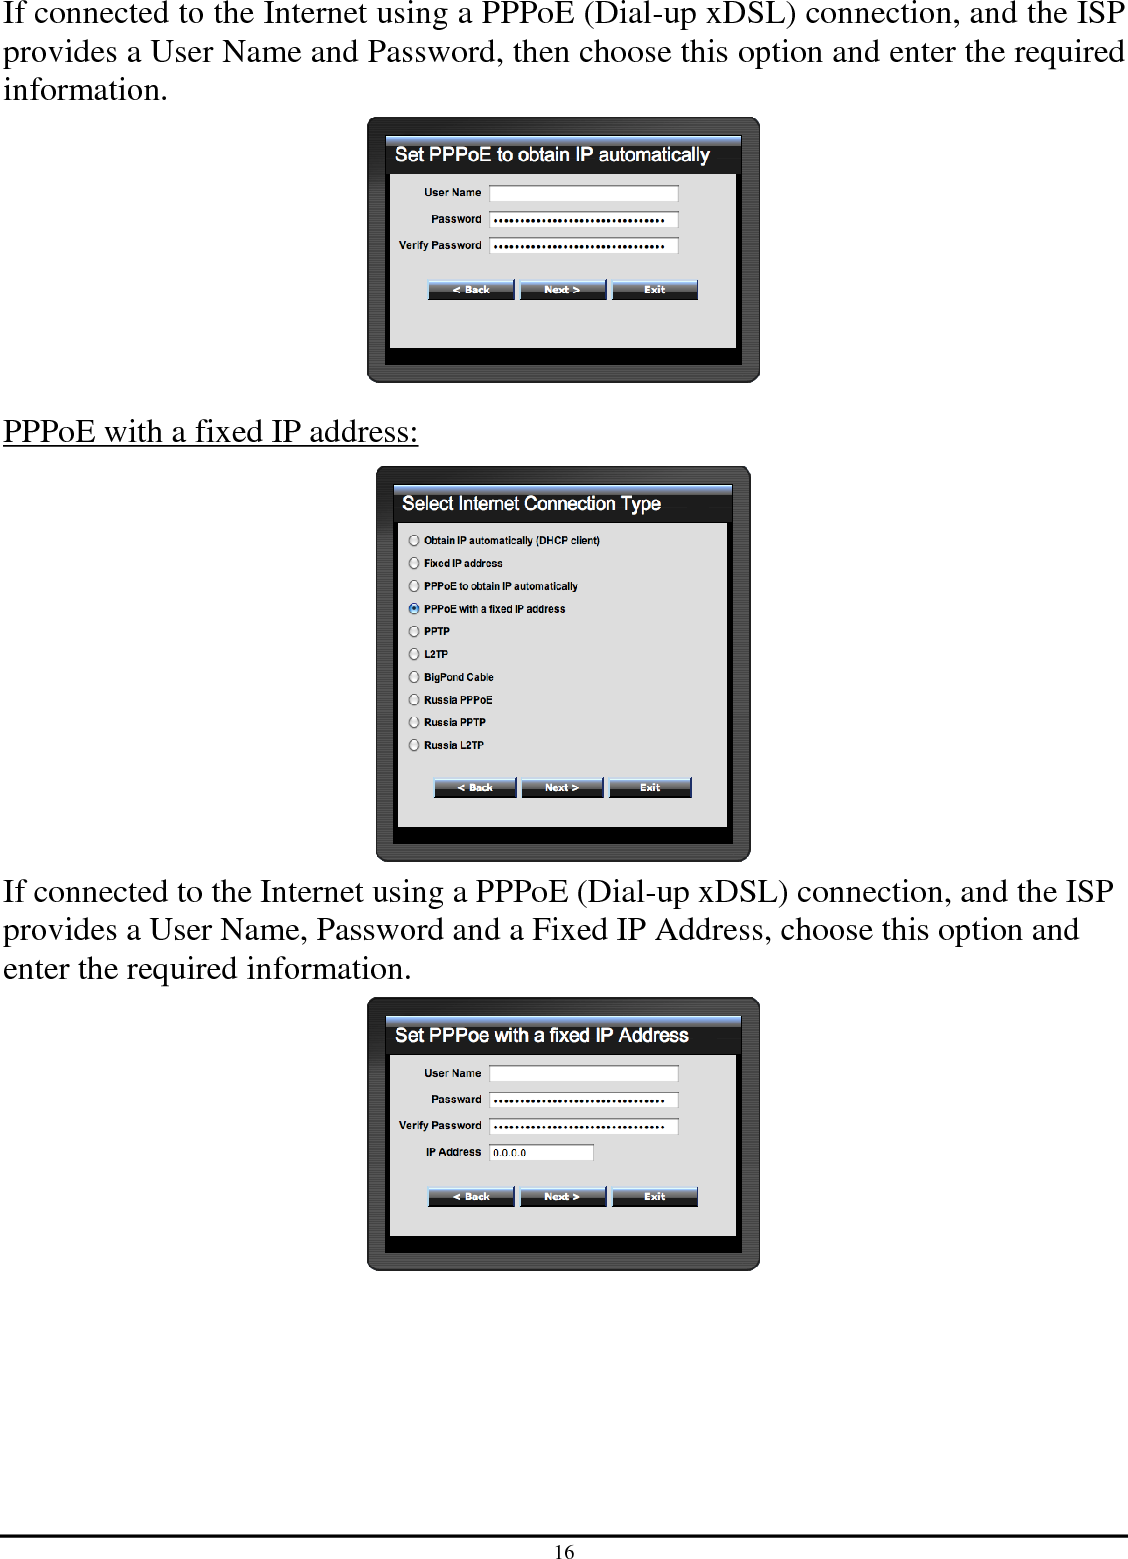 16 If connected to the Internet using a PPPoE (Dial-up xDSL) connection, and the ISP provides a User Name and Password, then choose this option and enter the required information.  PPPoE with a fixed IP address:  If connected to the Internet using a PPPoE (Dial-up xDSL) connection, and the ISP provides a User Name, Password and a Fixed IP Address, choose this option and enter the required information.  